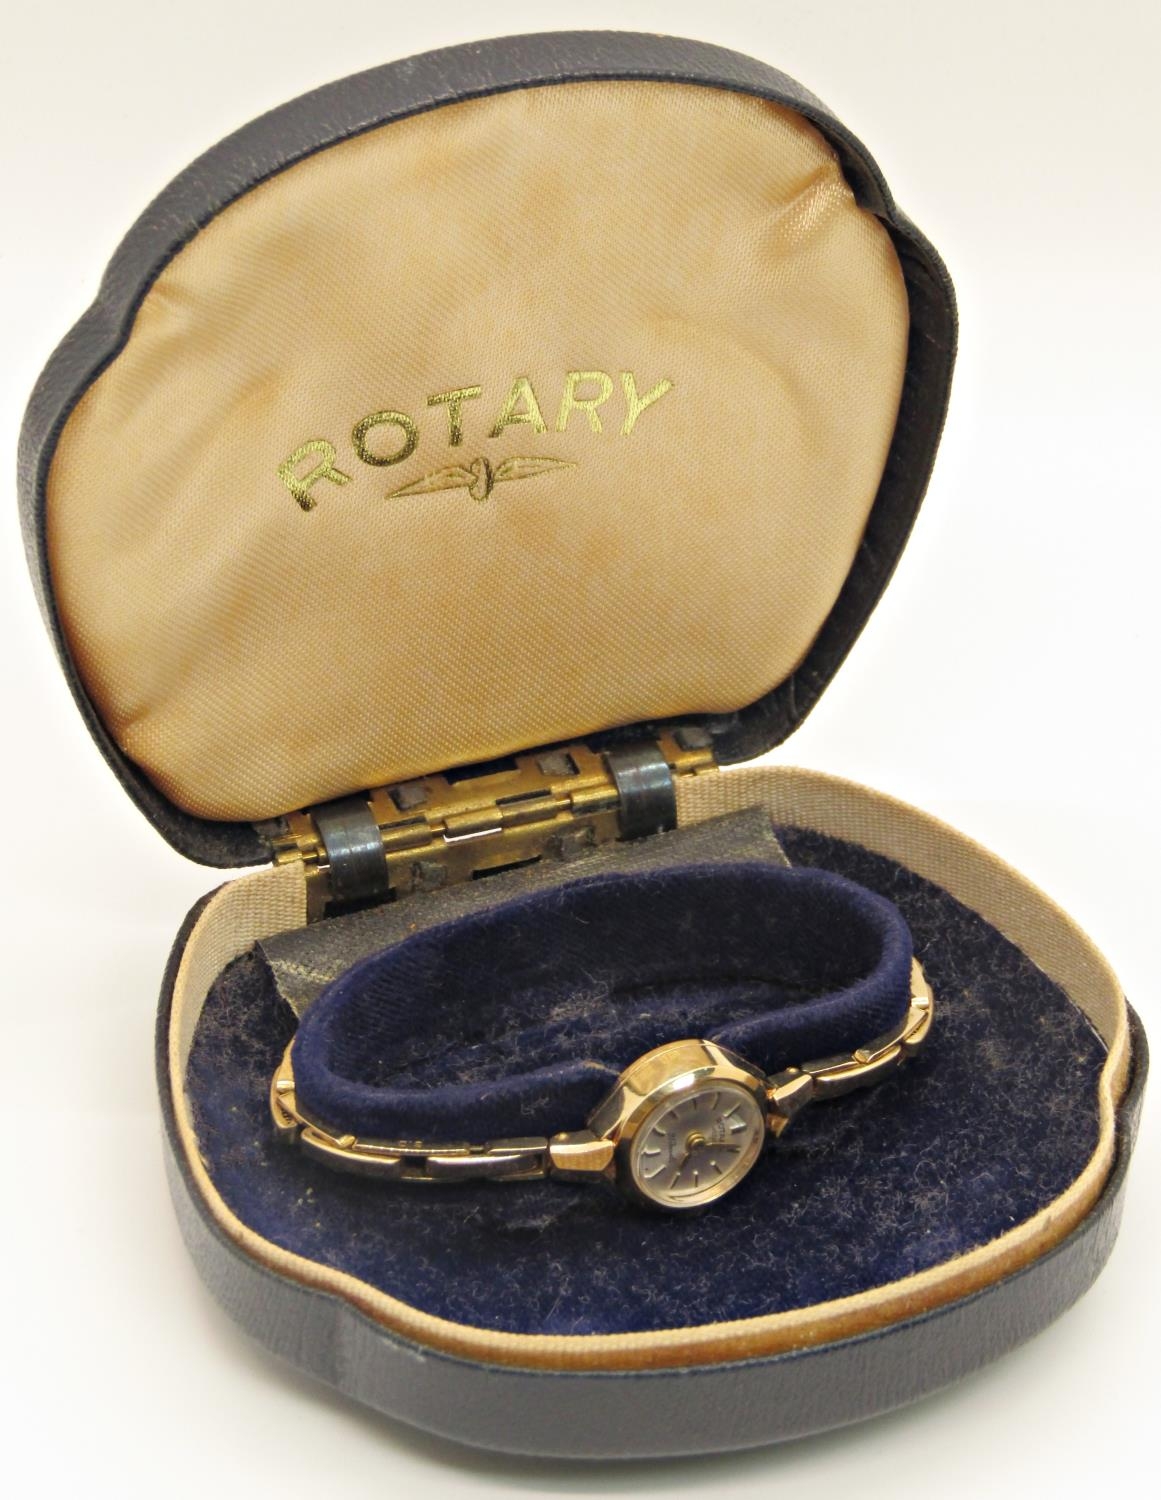 Rotary ladies dress watch with 9ct gold case and bracelet, 13gms all in - Image 5 of 5